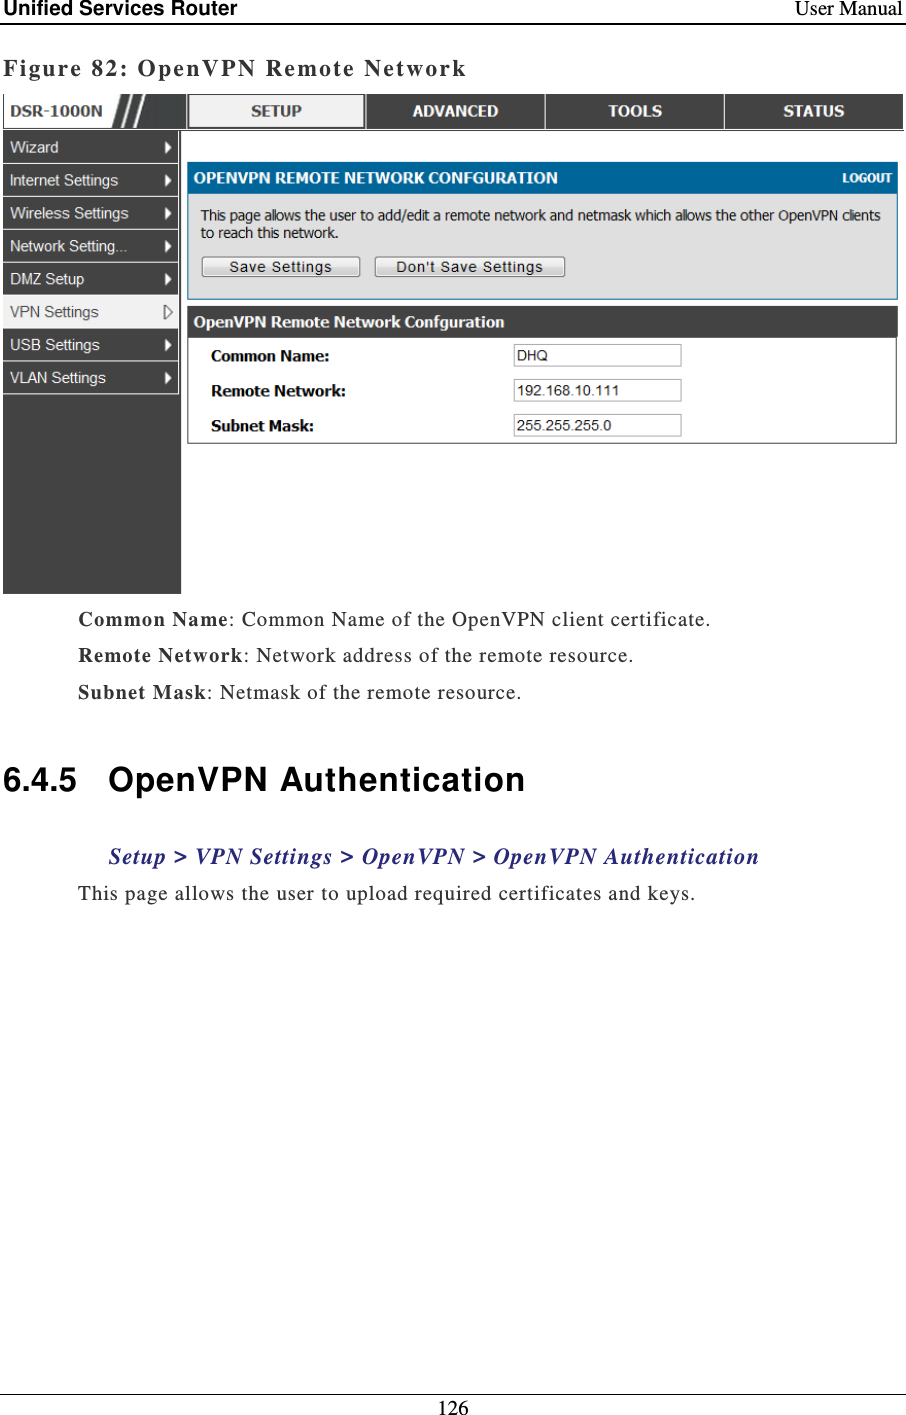 Unified Services Router    User Manual 126  Figure 82: Ope nVPN Remote Networ k   Common Name: Common Name of the OpenVPN client certificate.  Remote Network: Network address of the remote resource.  Subnet Mask: Netmask of the remote resource.   6.4.5  OpenVPN Authentication Setup &gt; VPN Settings &gt; OpenVPN &gt; OpenVPN Authentication This page allows the user to upload required certificates and keys.  